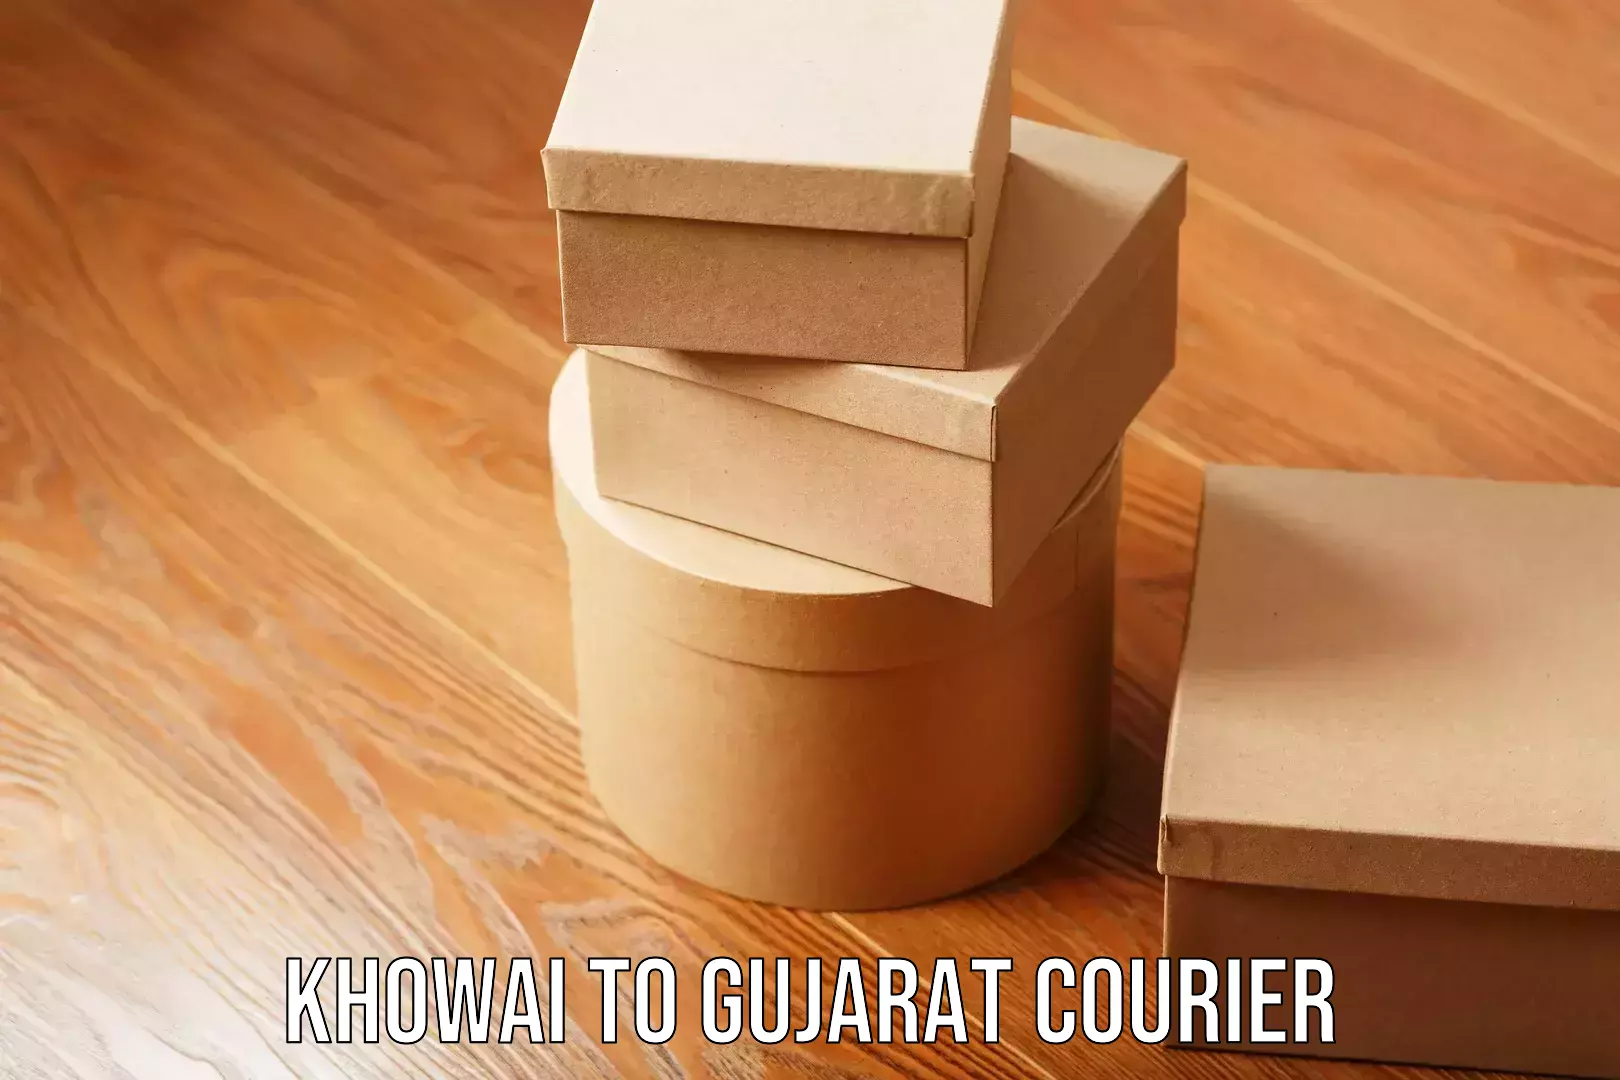 24/7 courier service in Khowai to Gujarat